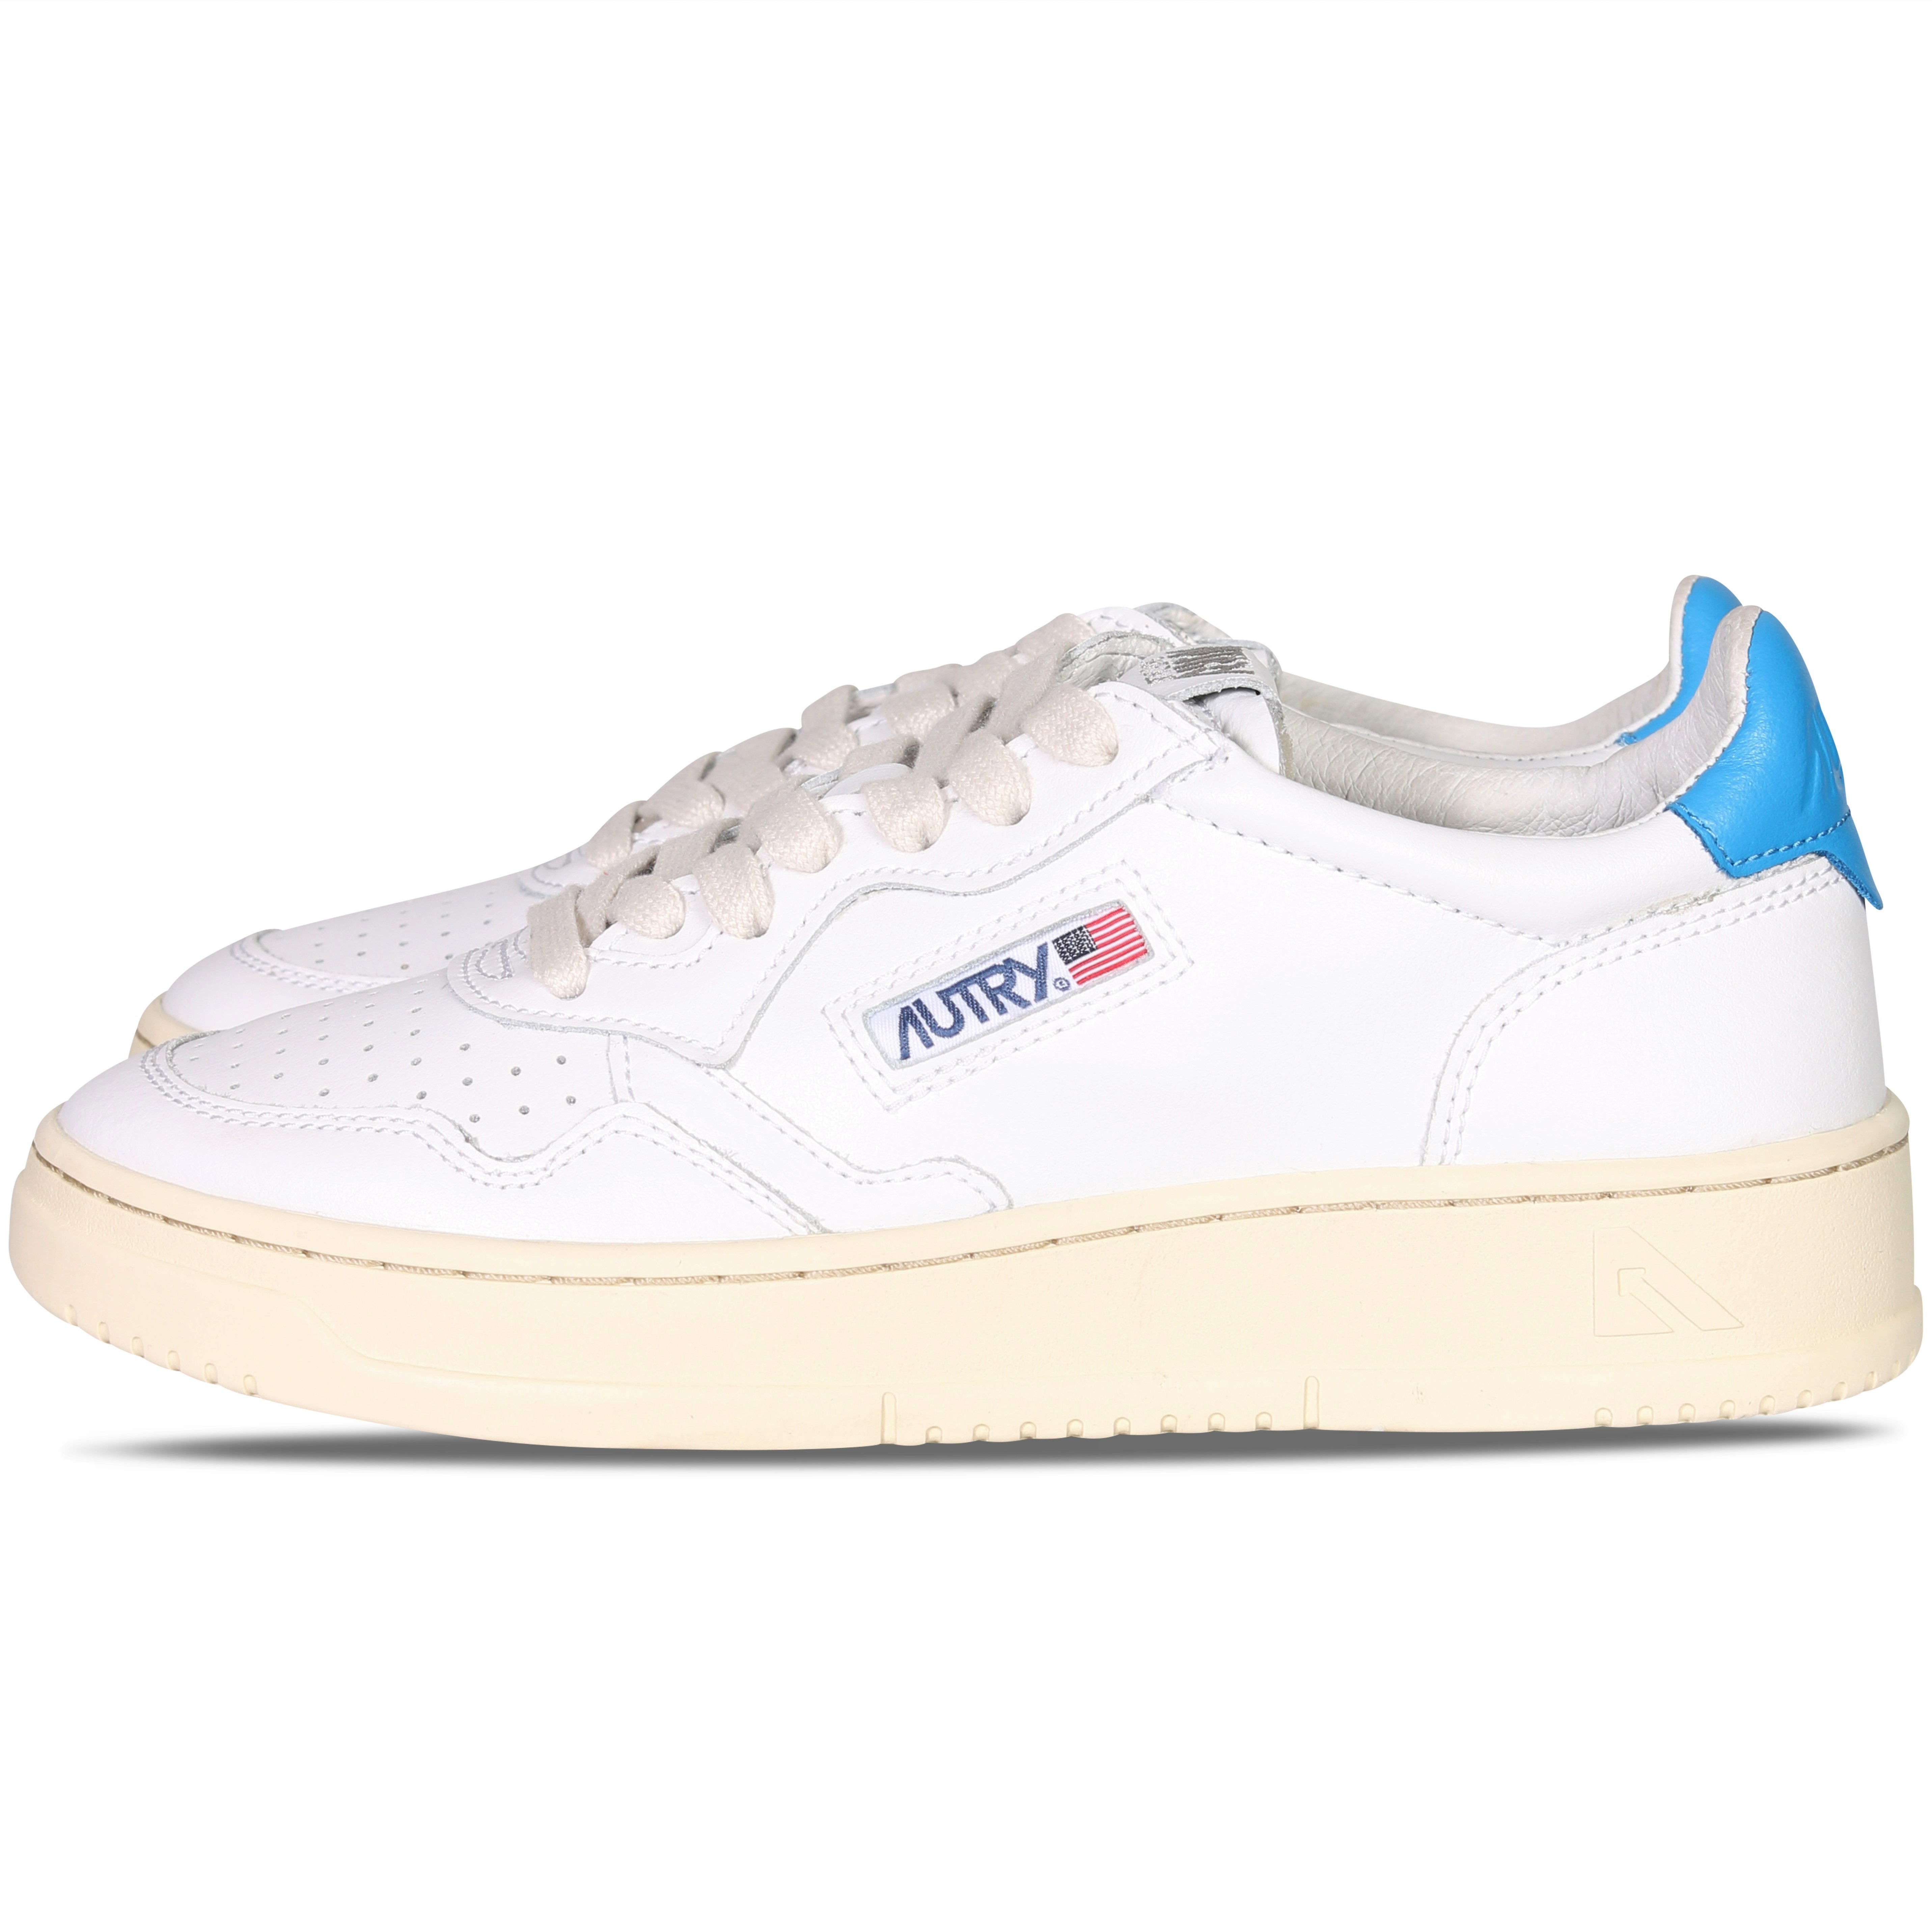 Autry Action Shoes Sneaker White/Azure 35